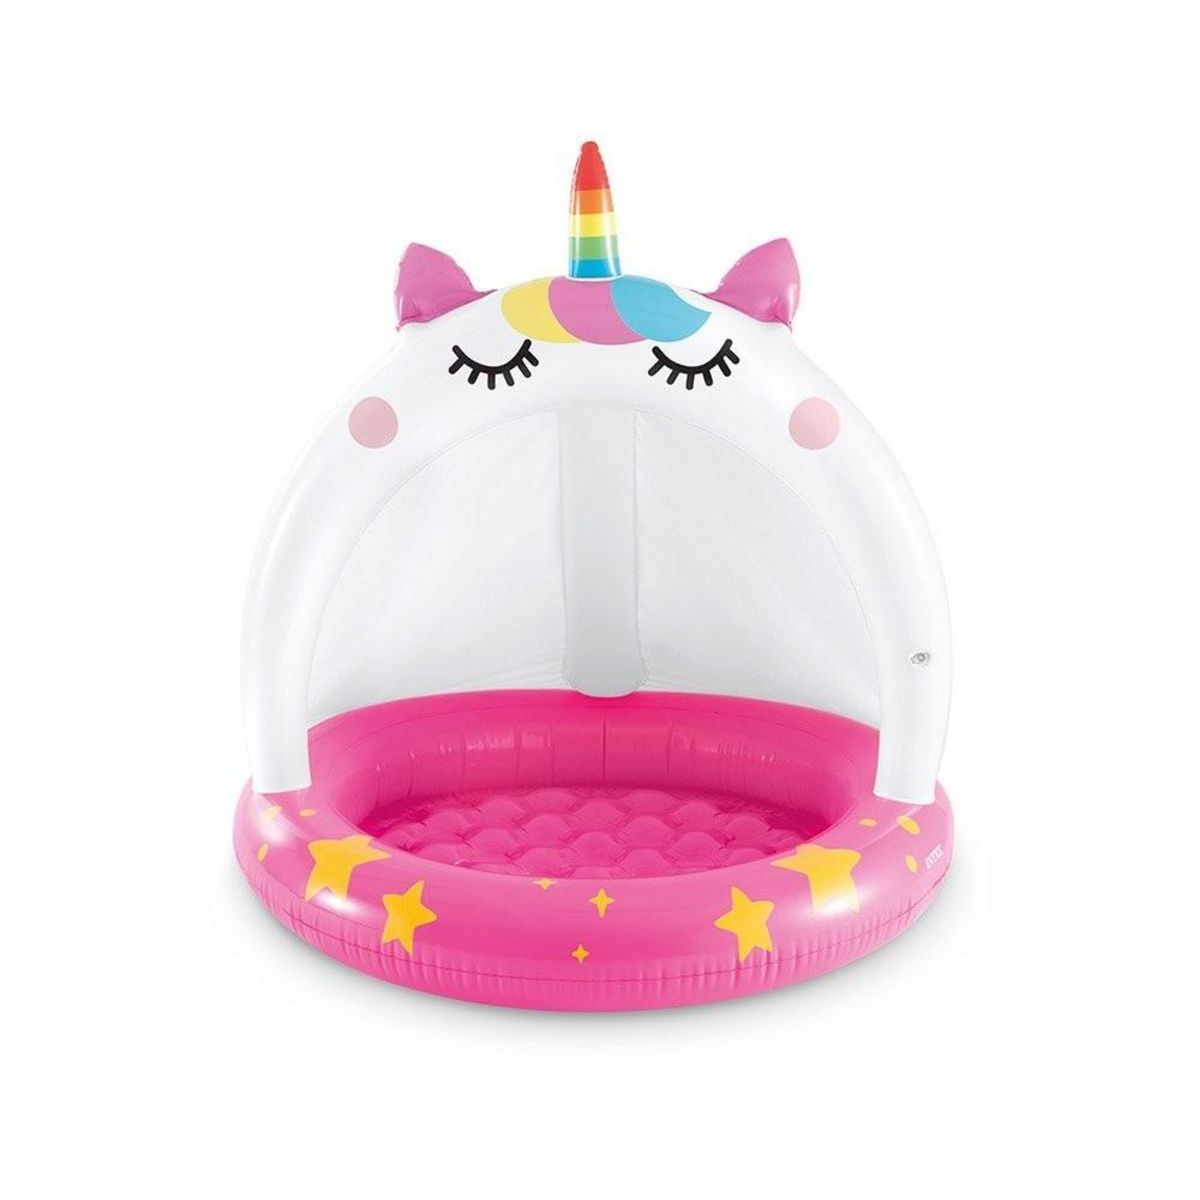 INTEX Piscinette gonflable Caticorn